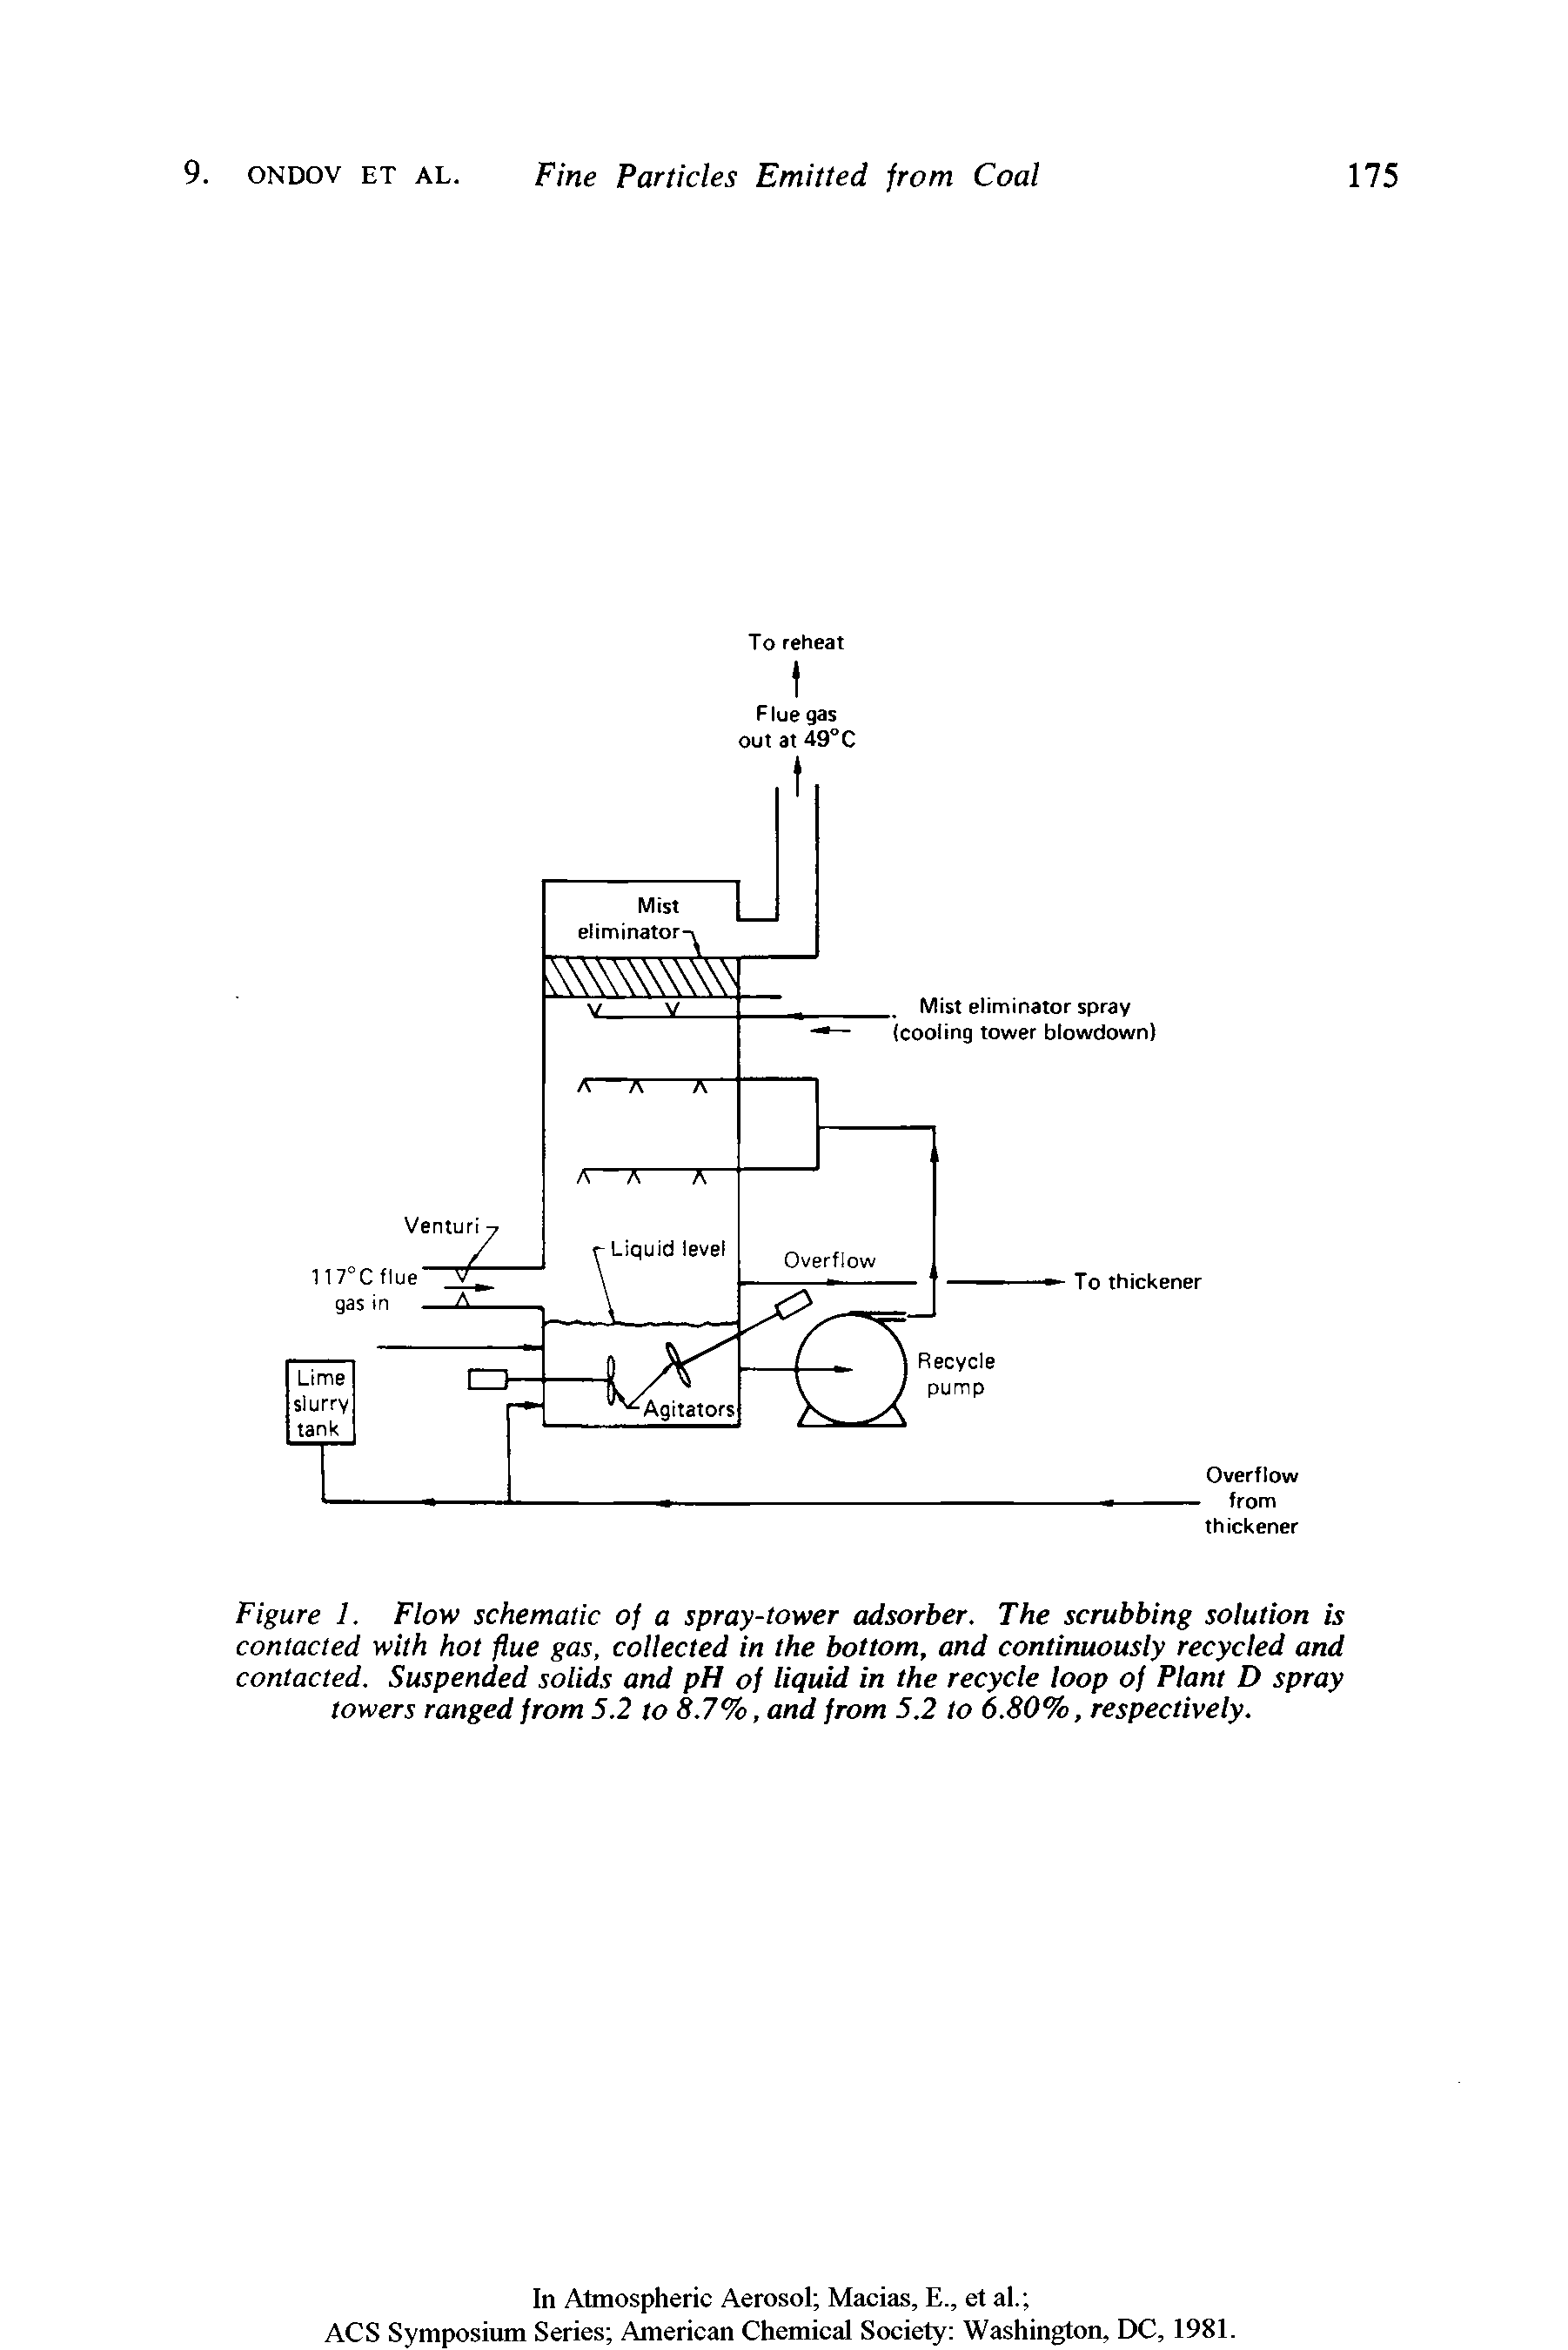 Figure 1. Flow schematic of a spray-tower adsorber. The scrubbing solution is contacted with hot flue gas, collected in the bottom, and continuously recycled and contacted. Suspended solids and pH of liquid in the recycle loop of Plant D spray towers ranged from 5.2 to 8.7%, and from 5.2 to 6.80%, respectively.